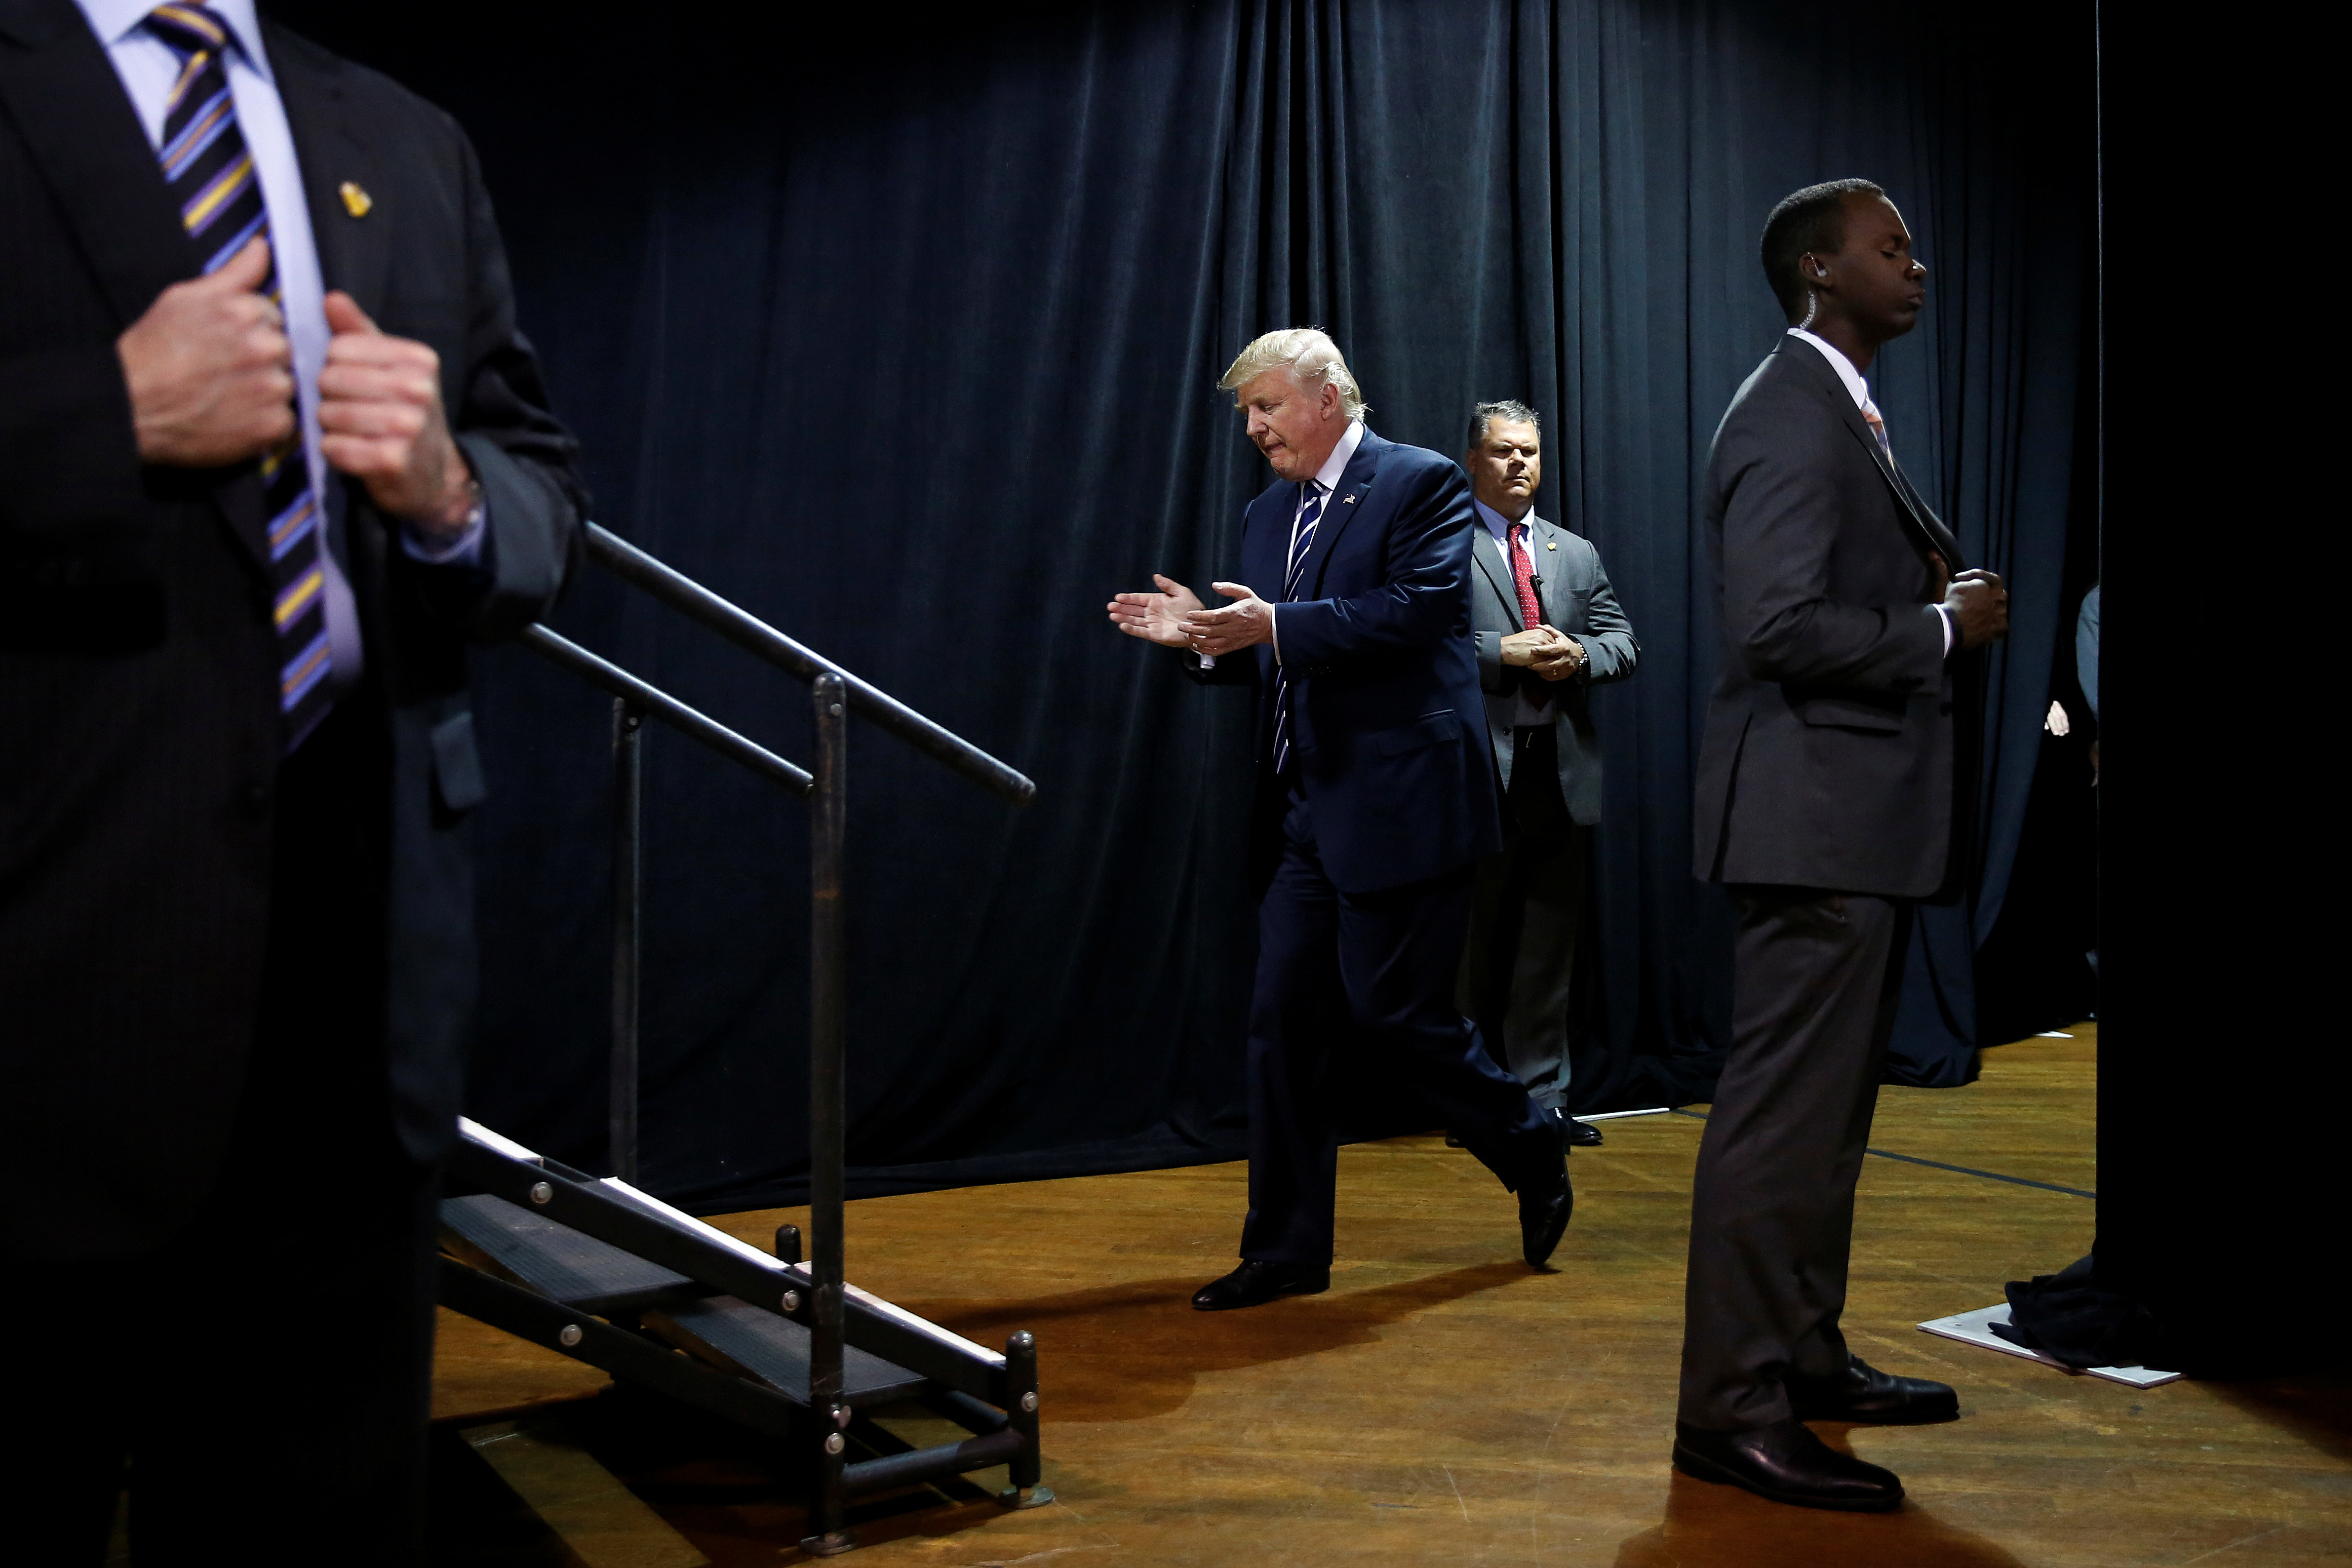 Donald Trump arrives at a campaign event in Manchester, New Hampshire on Oct. 28, 2016.